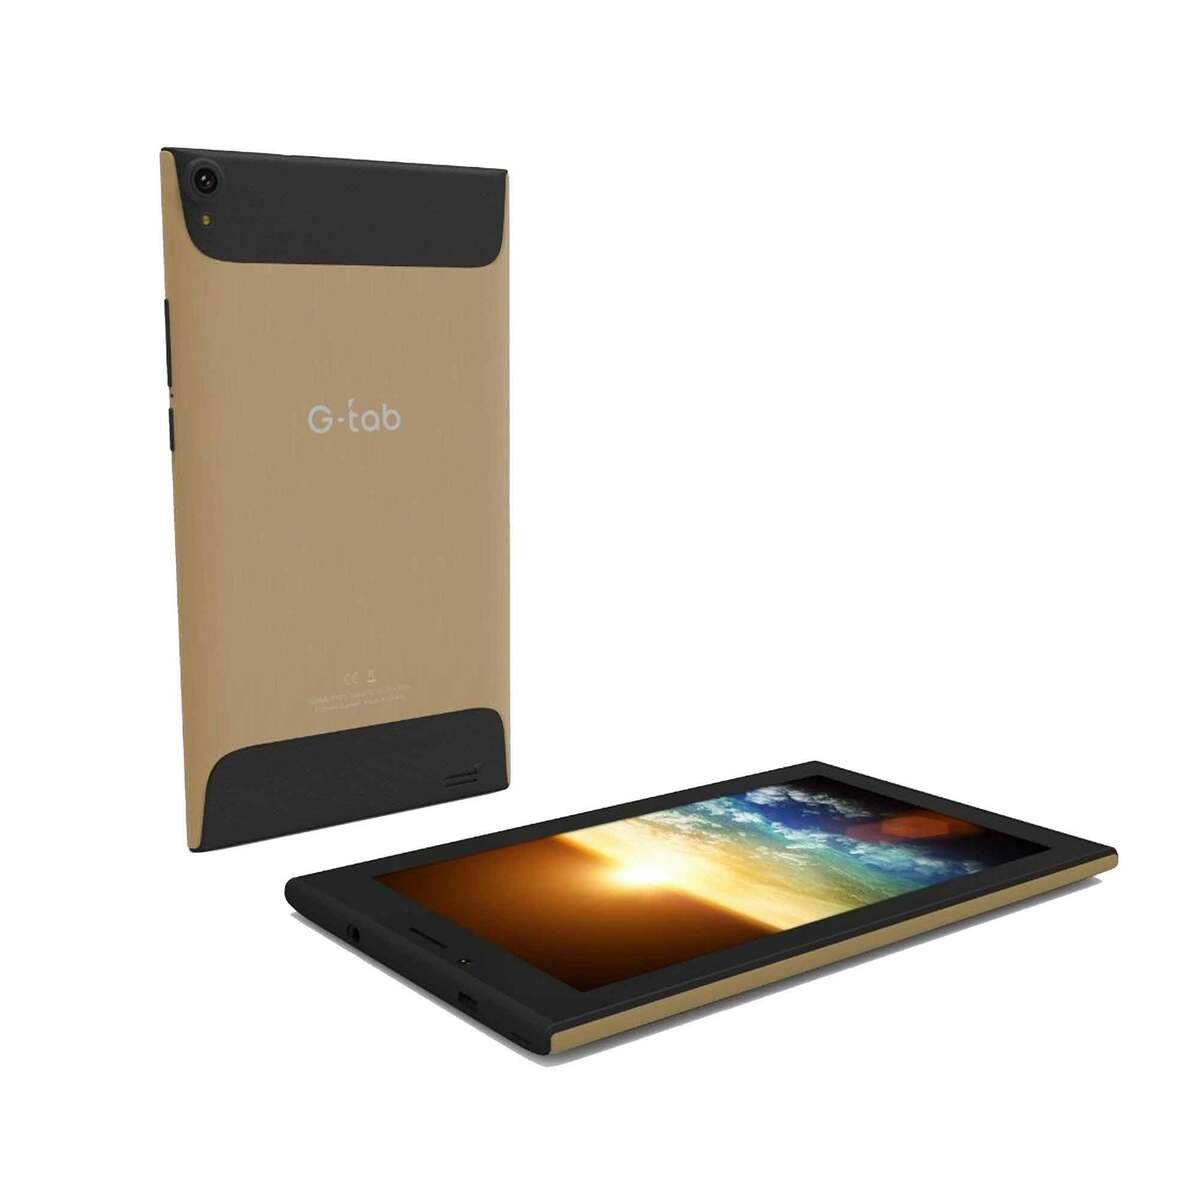 Gtab Tablet P733, 3G, Quad-core Processor, 1GB RAM, 16GB Memory, 7.0 inches Display, Android, Gold